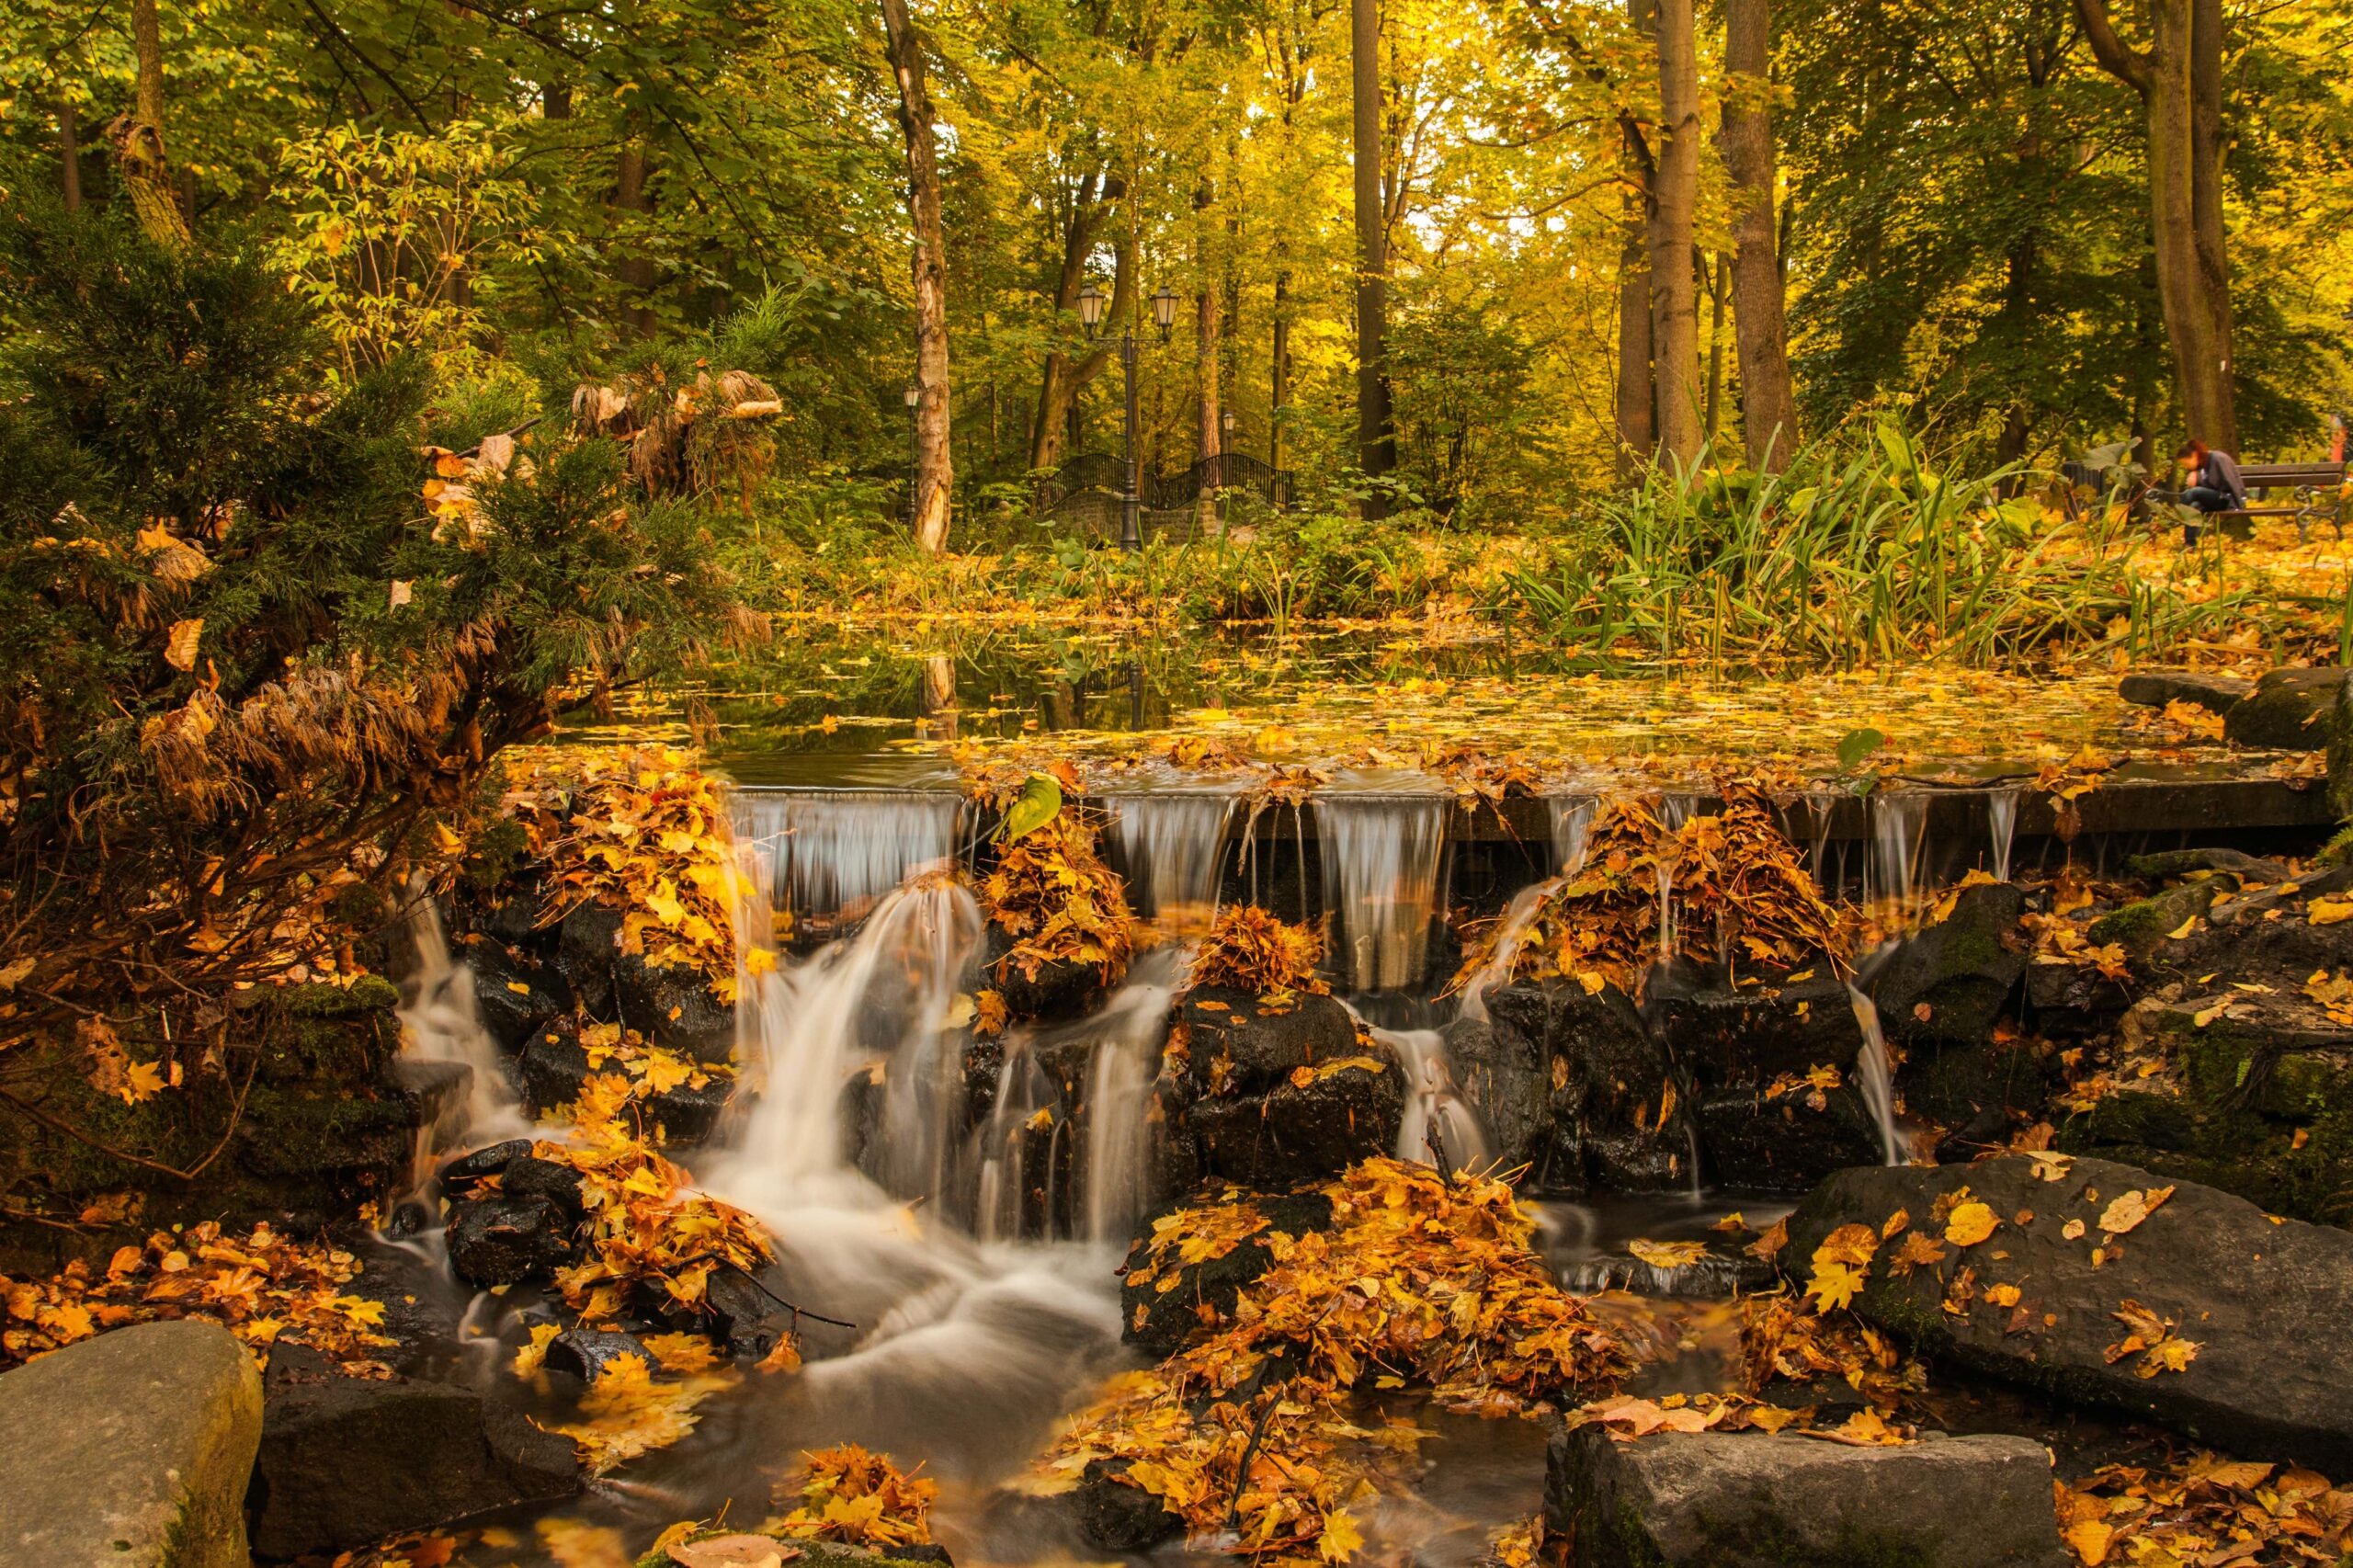 A river runs through a forest of trees. Water flows over a small barrier in the foreground, and continues on through rocks covered in fall leaves.